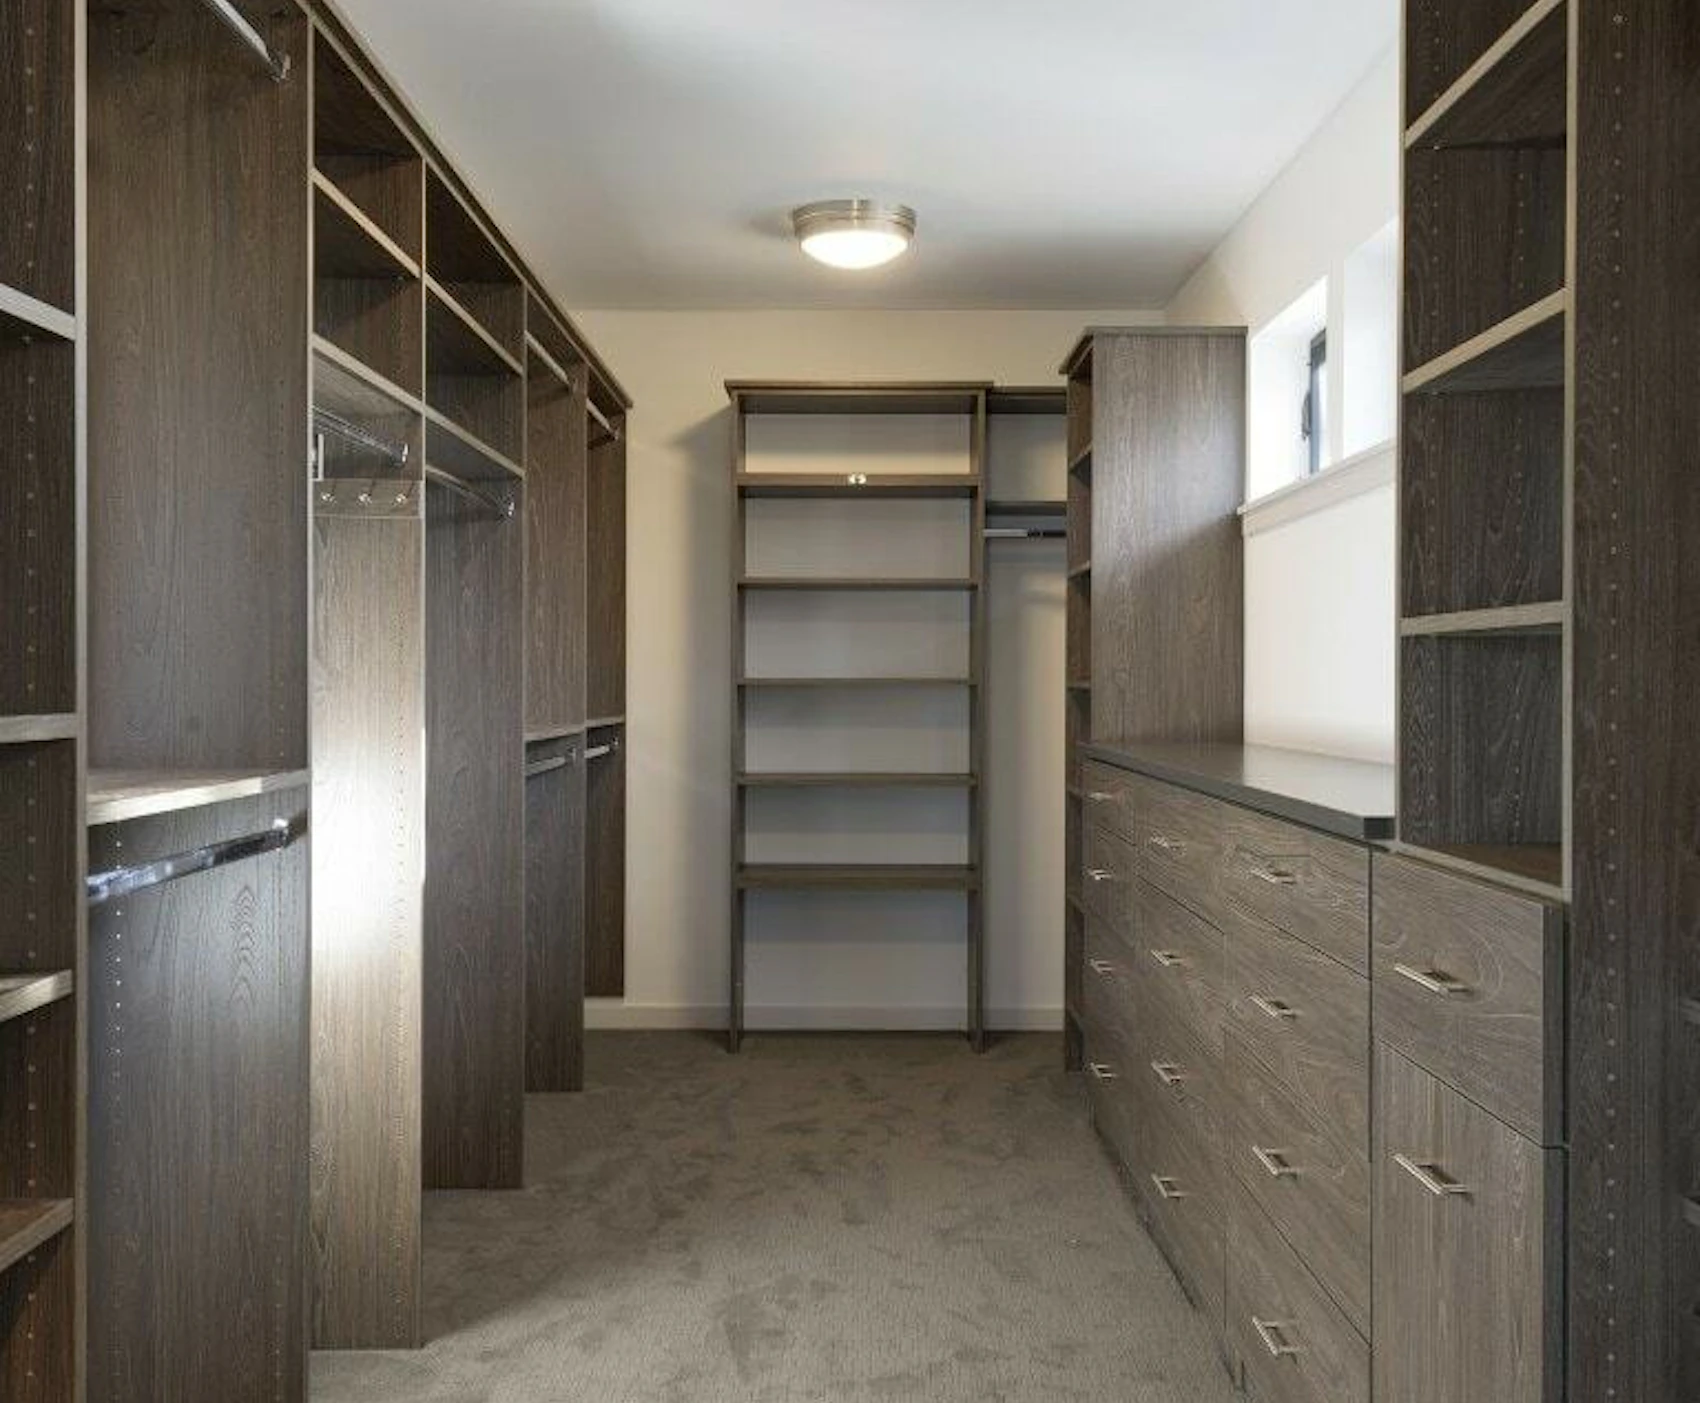 Extremely spacious walk-in closet